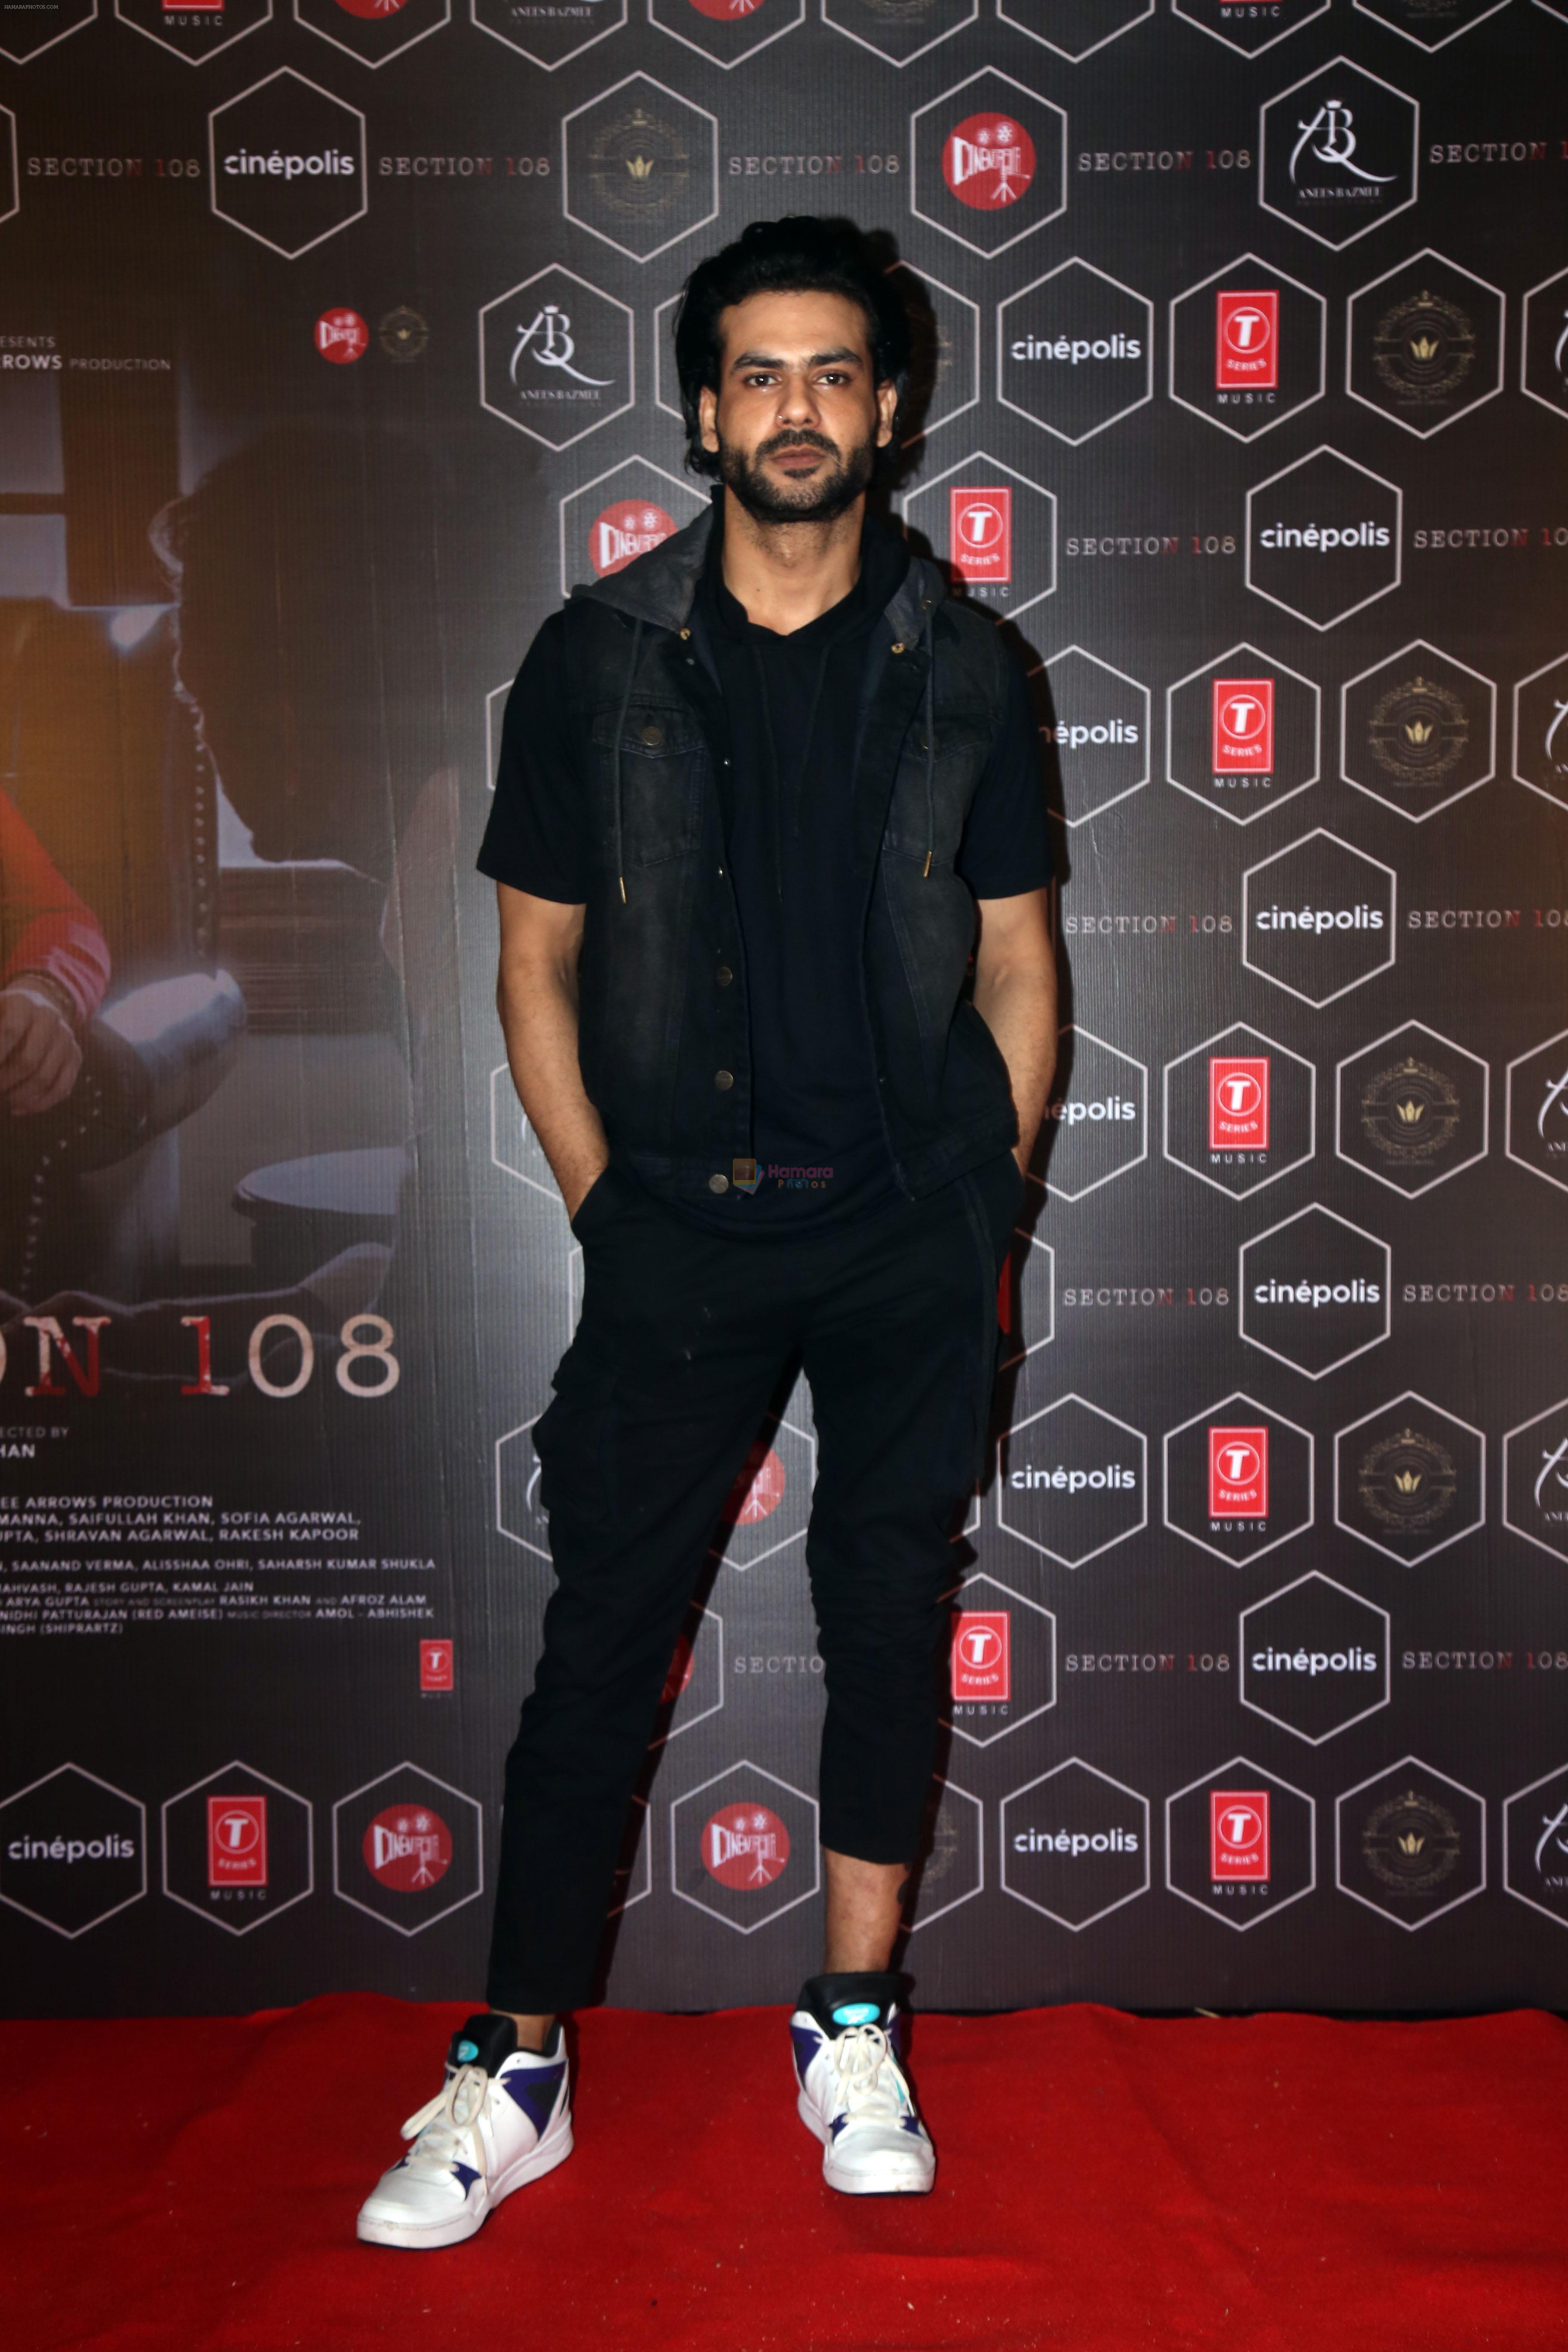 Vishal Aditya Singh at the launch of film Section 108 Teaser on 27th August 2023